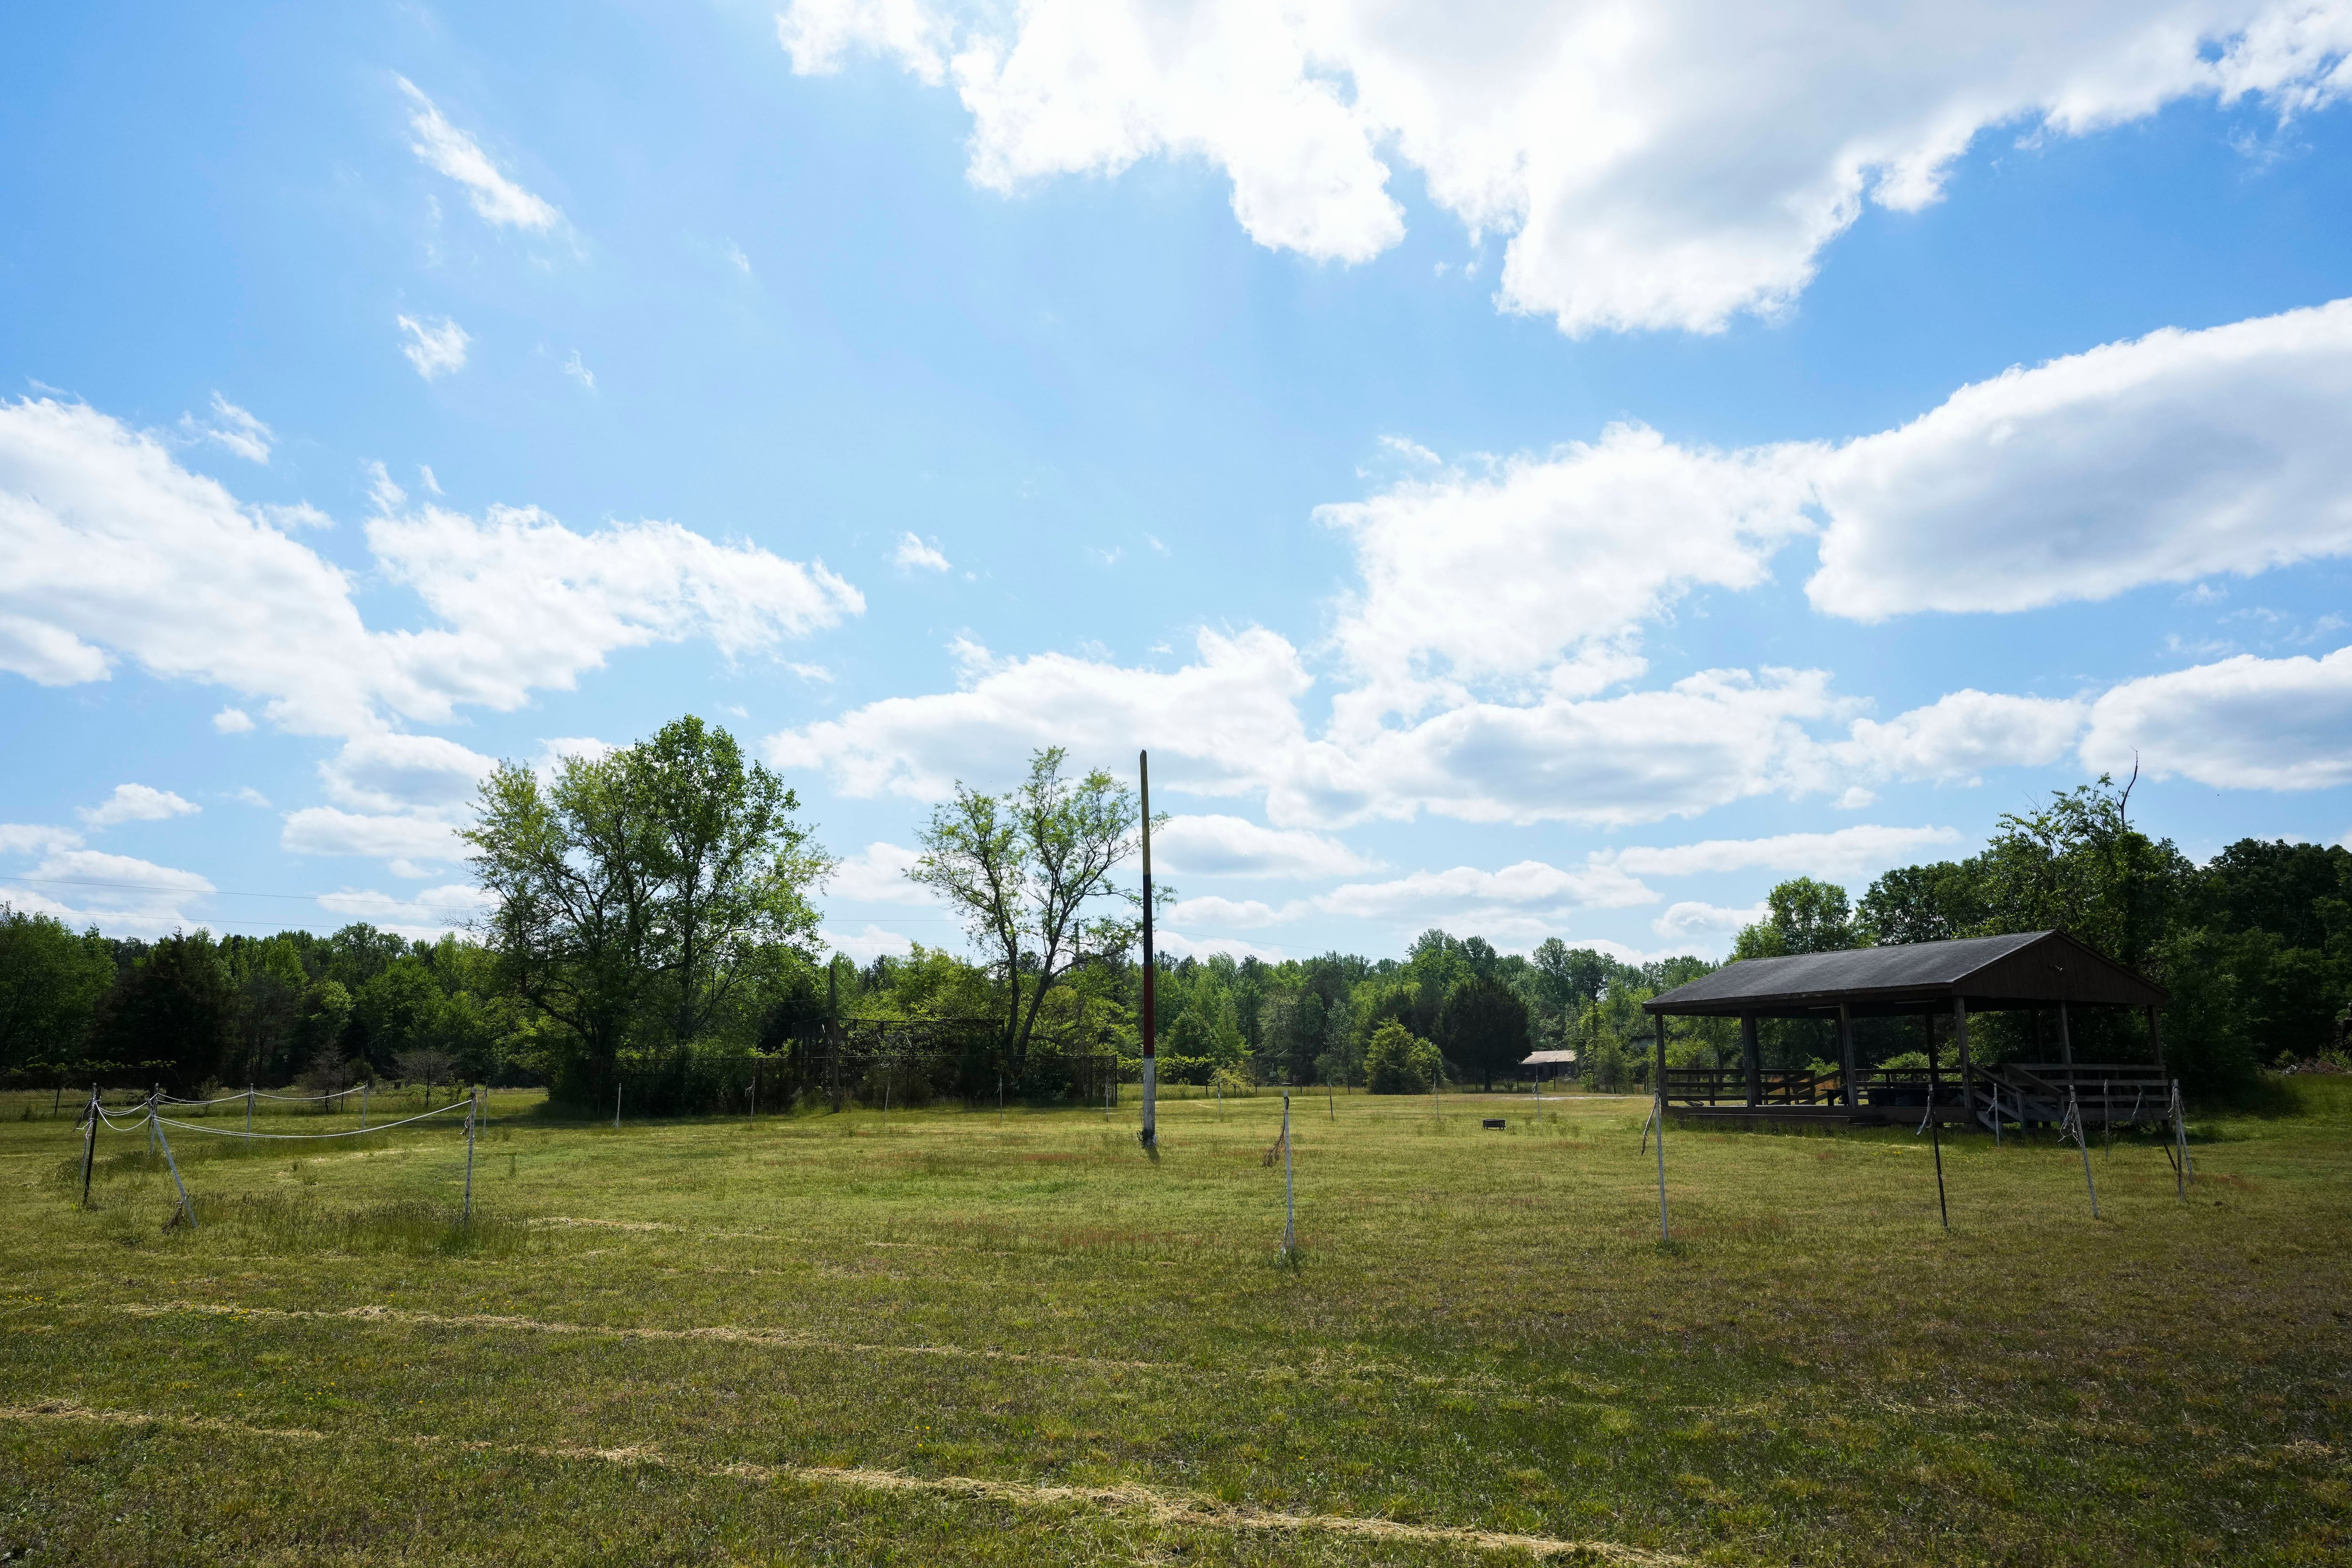 Scenes of the now emptied out Museum on the 16-acre land that the Cedarville Band of Piscataway has been on for almost forty years on April 24, 2023.